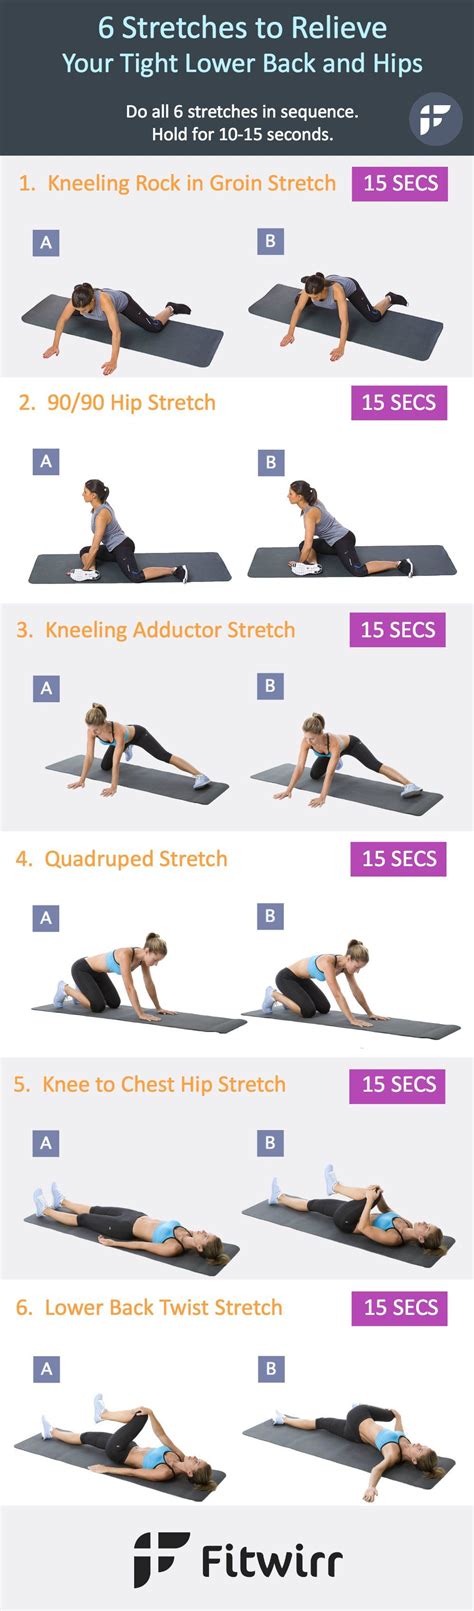 Stretches For Stiff Lower Back And Hips Off